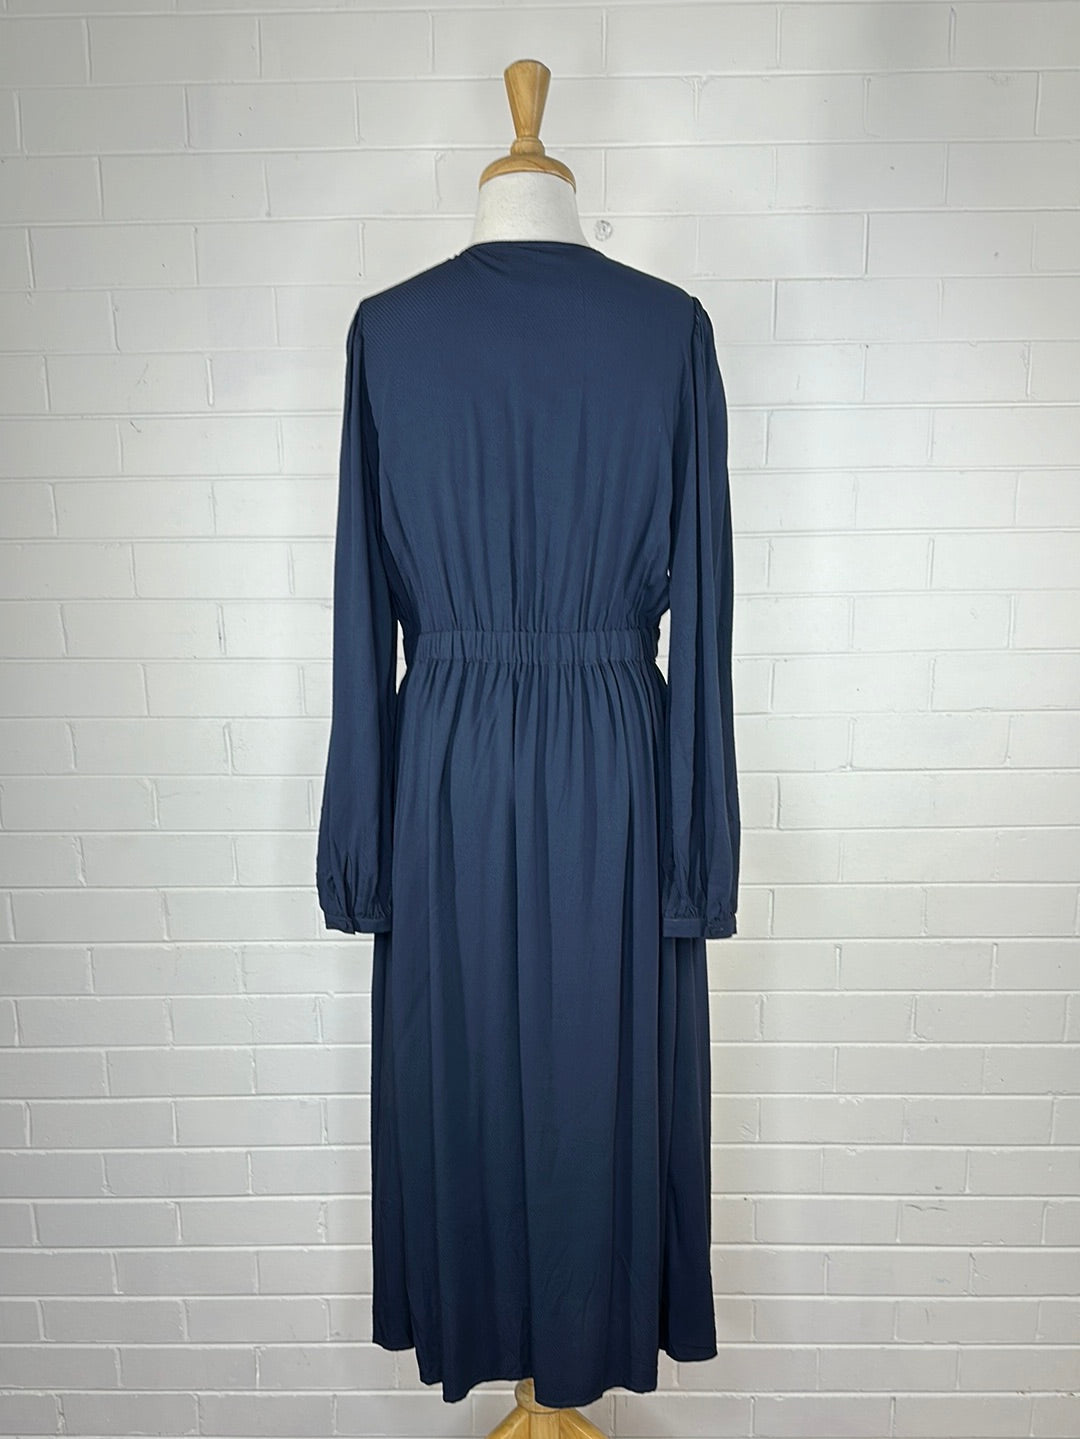 Y.A.S | dress | size 10 | midi length | new with tags